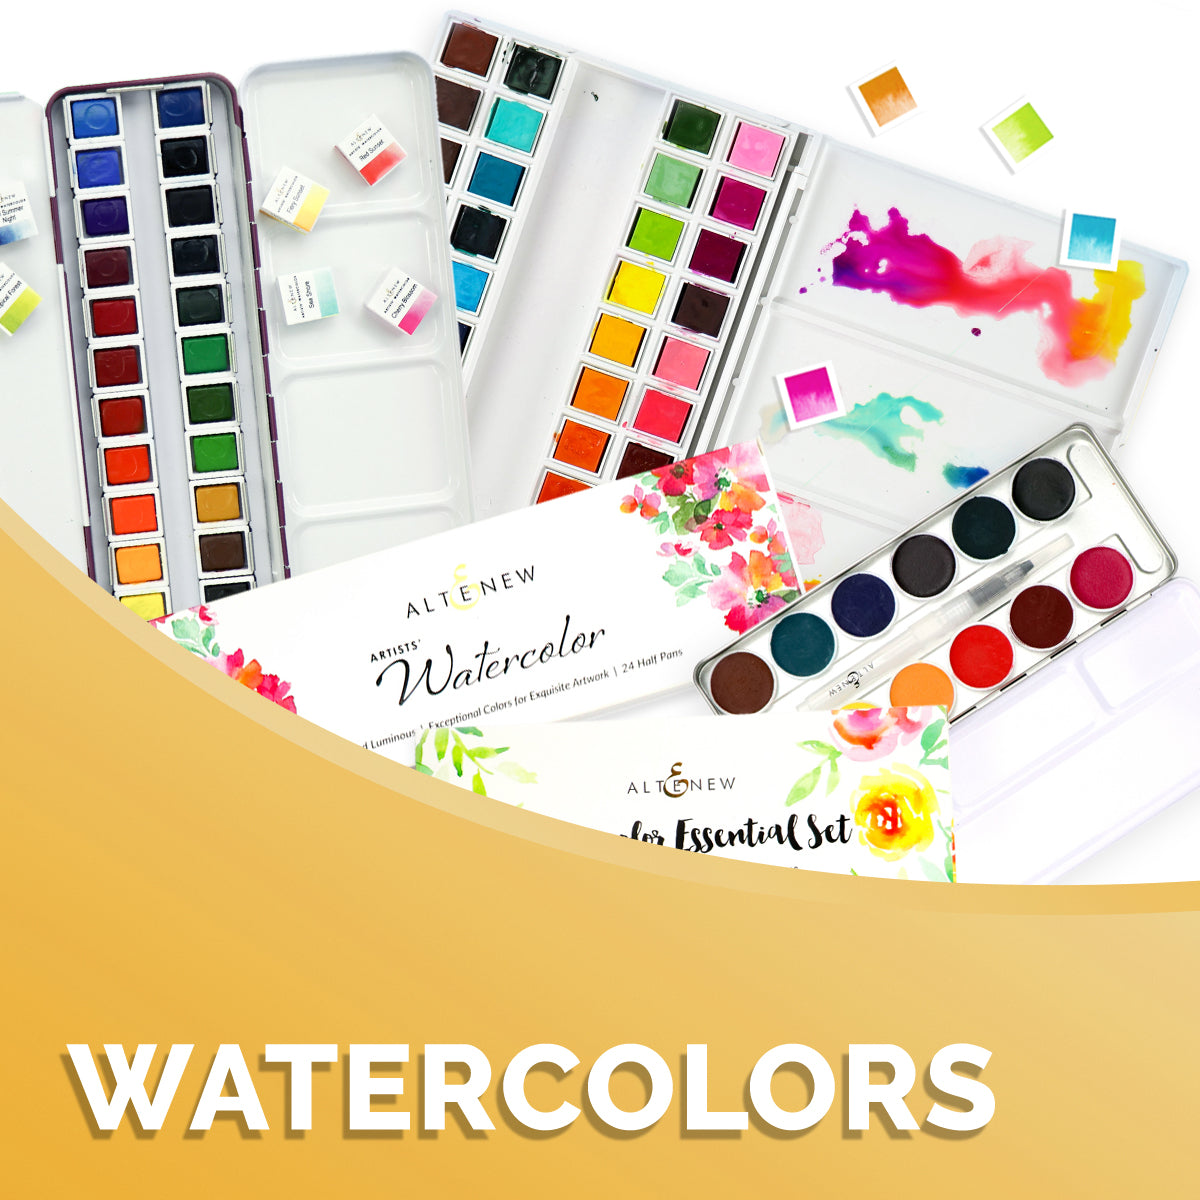 What Is the Best Watercolor Book for Beginners? – Altenew